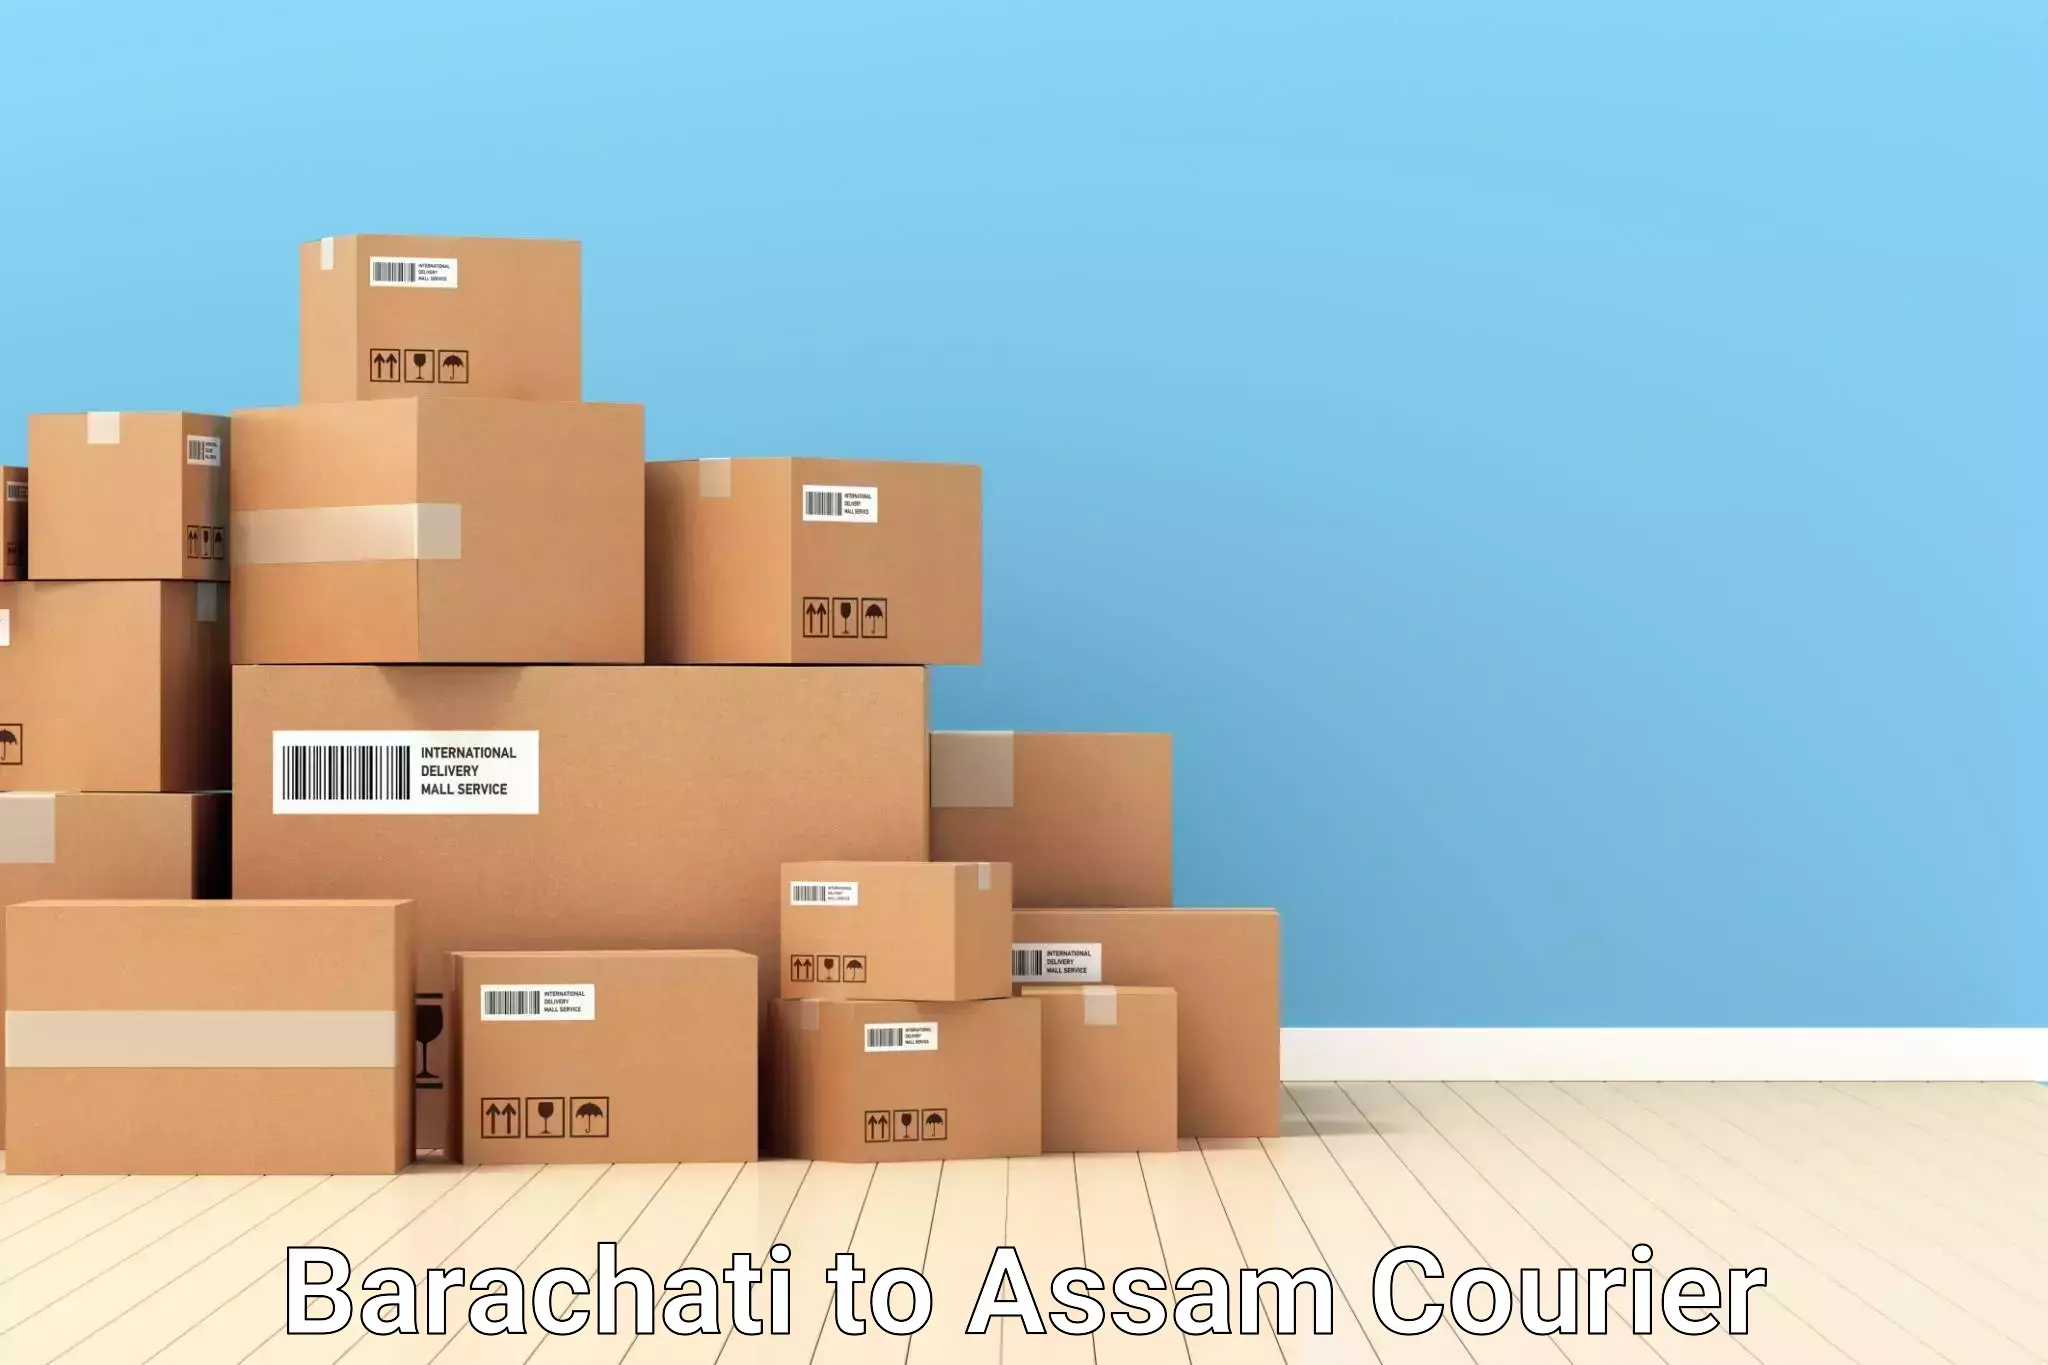 Luggage transport consulting Barachati to Lala Assam